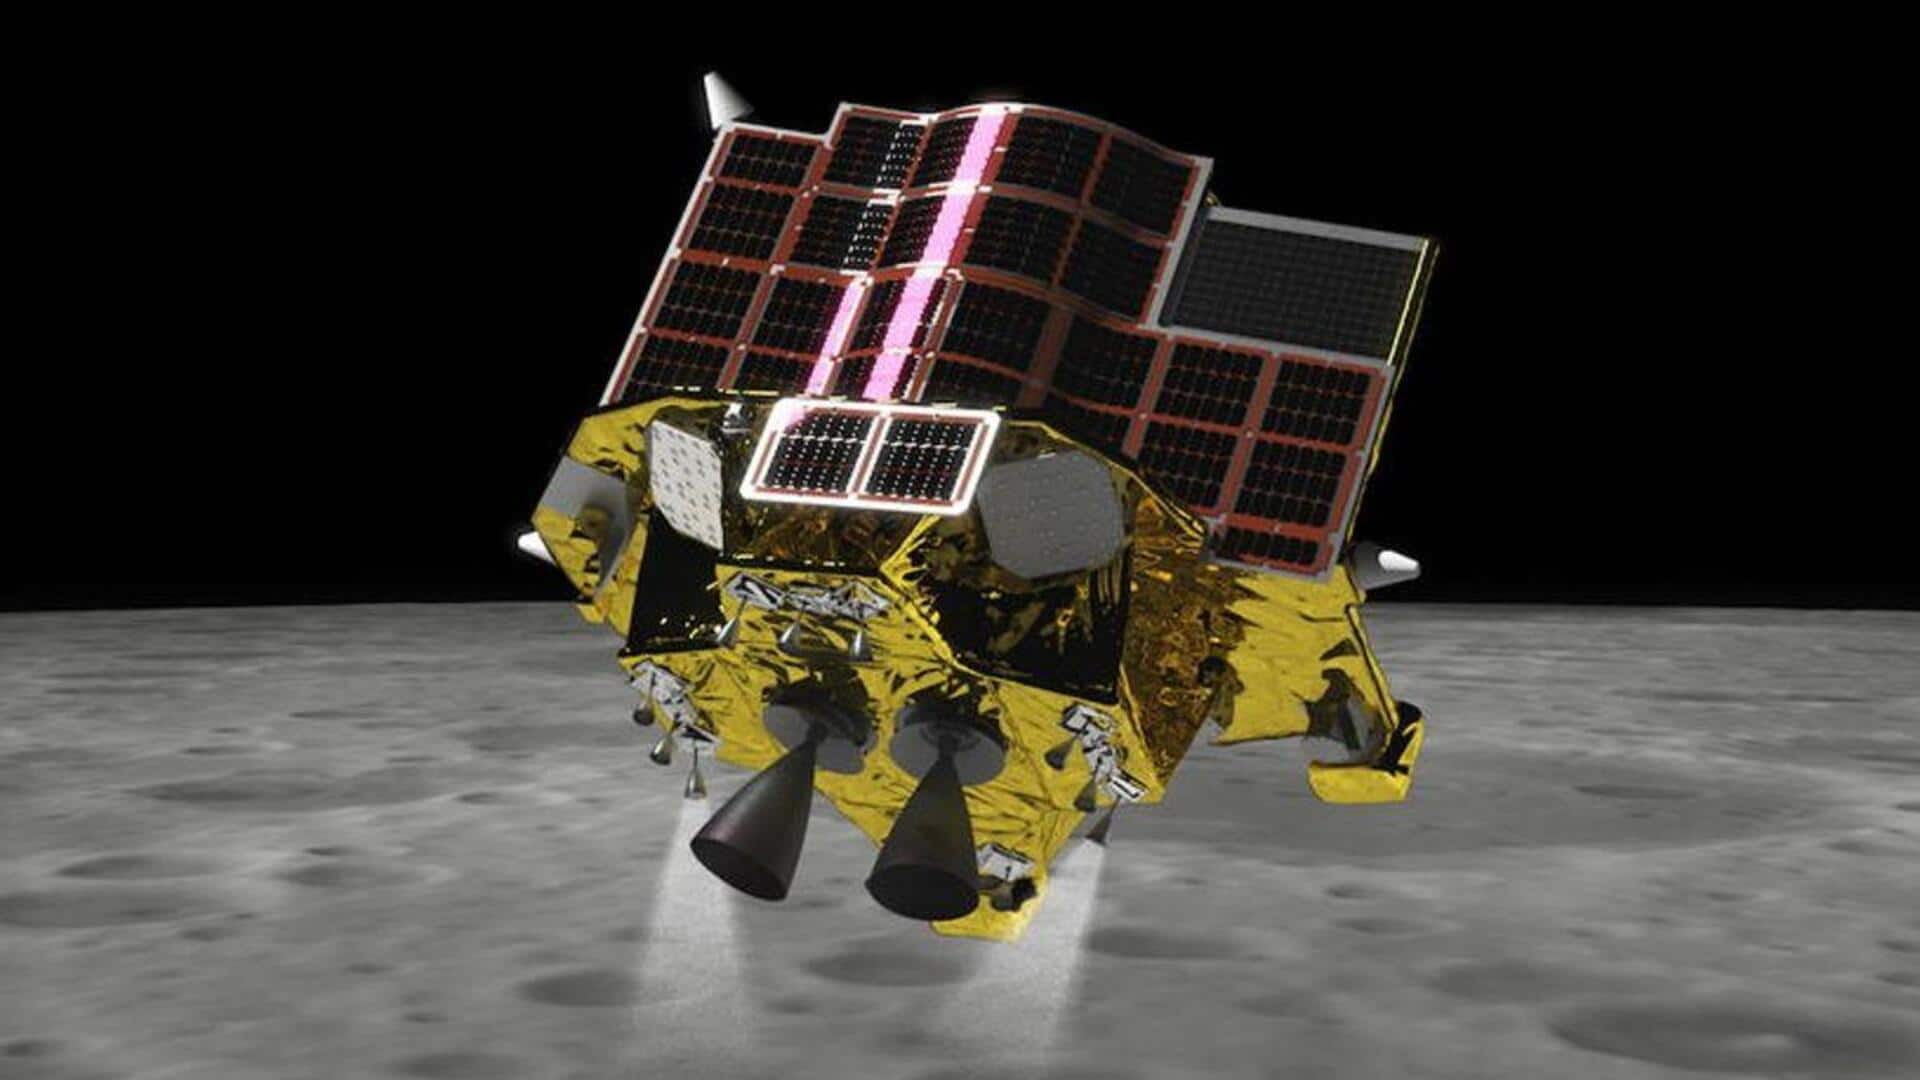 Japan's 'Moon Sniper' probe aims for precision lunar landing today